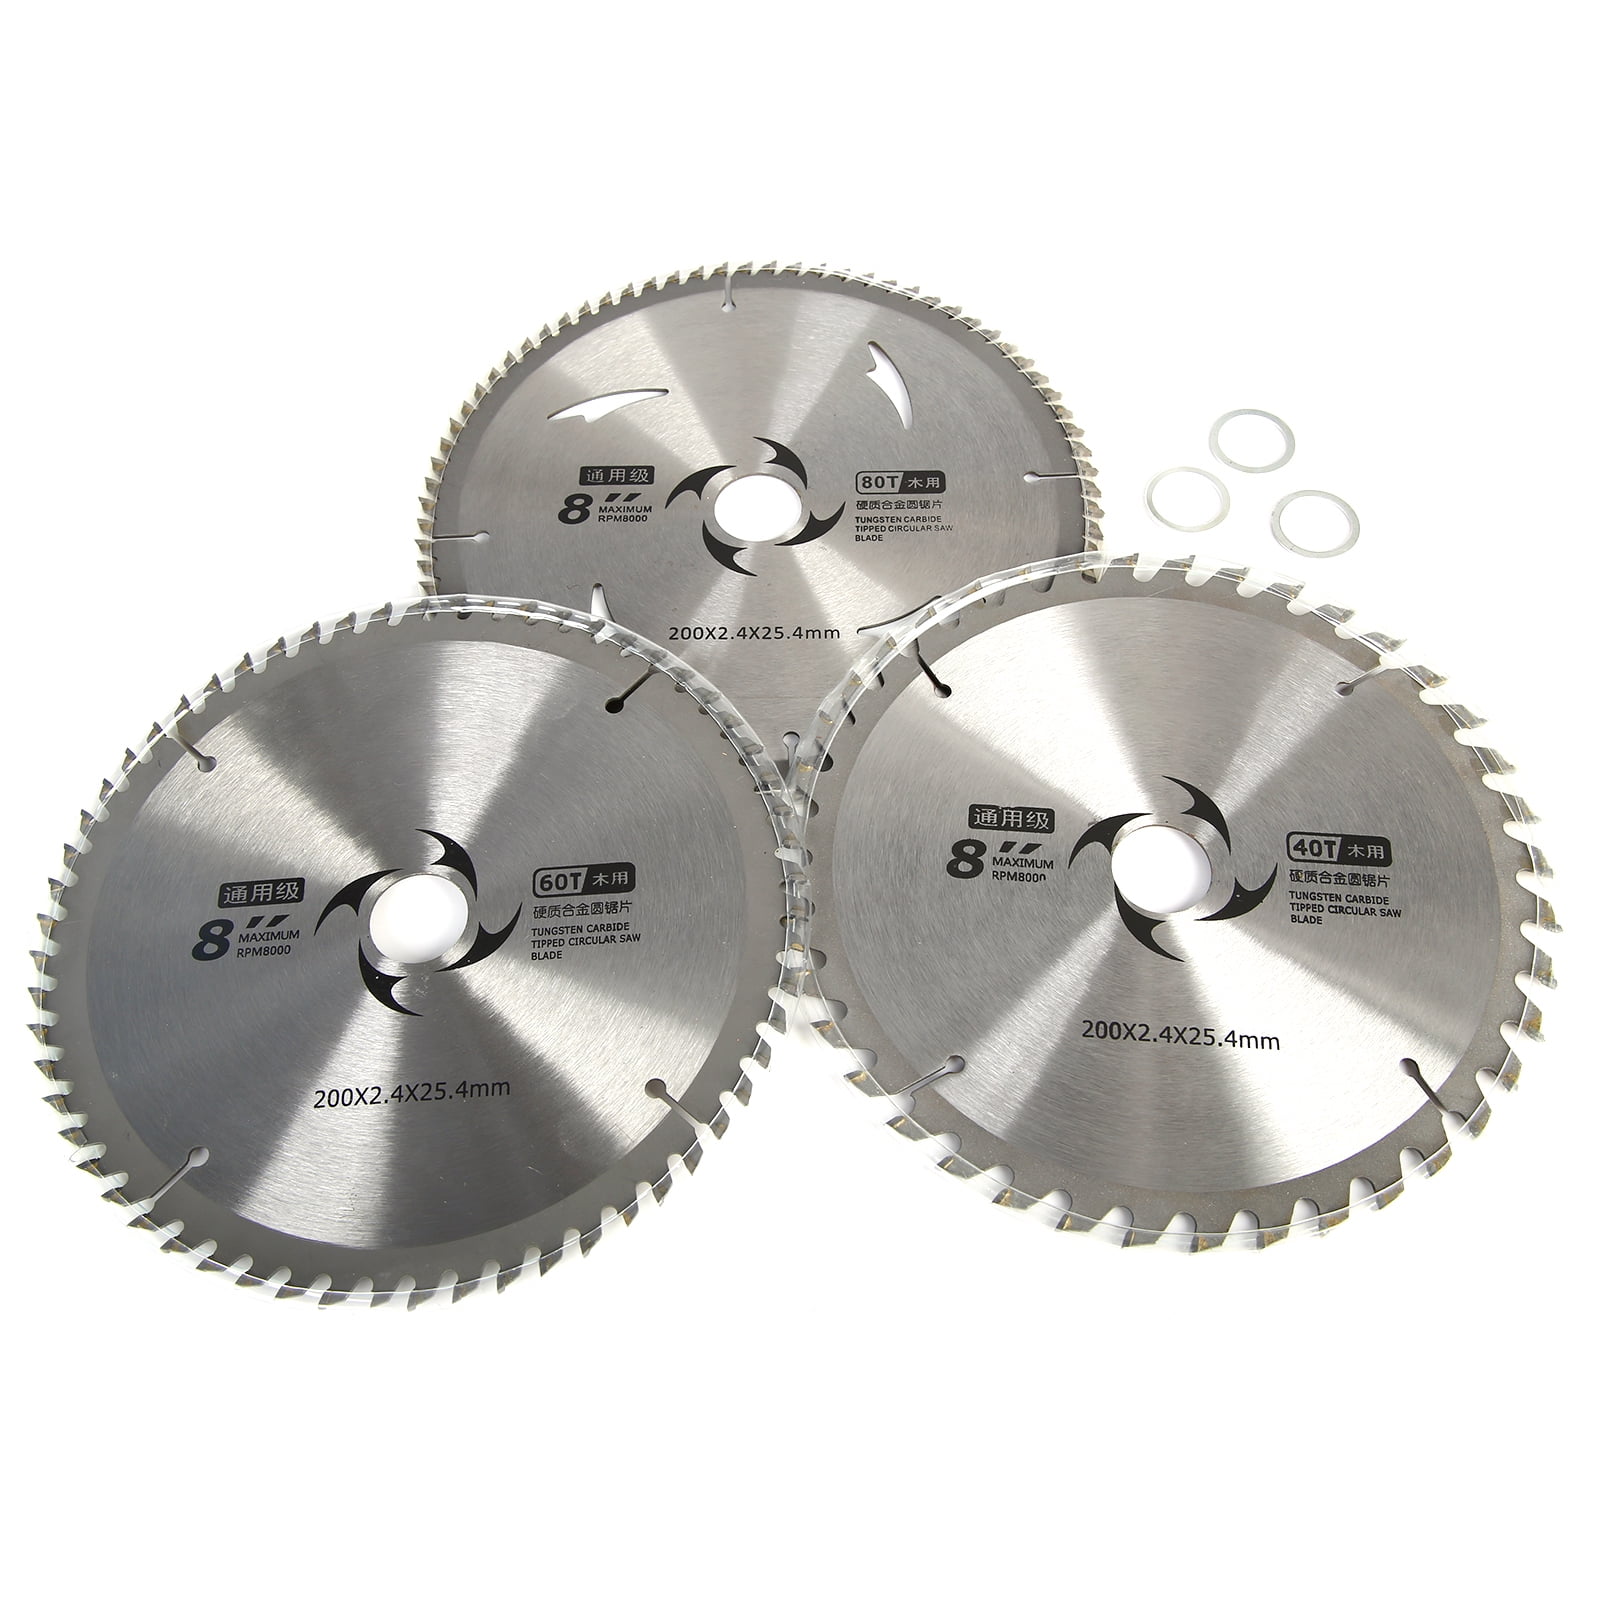 200mm Carbide Tipped Circular Saw Blade For Wood Cutting 40 Tooth Woodworking 